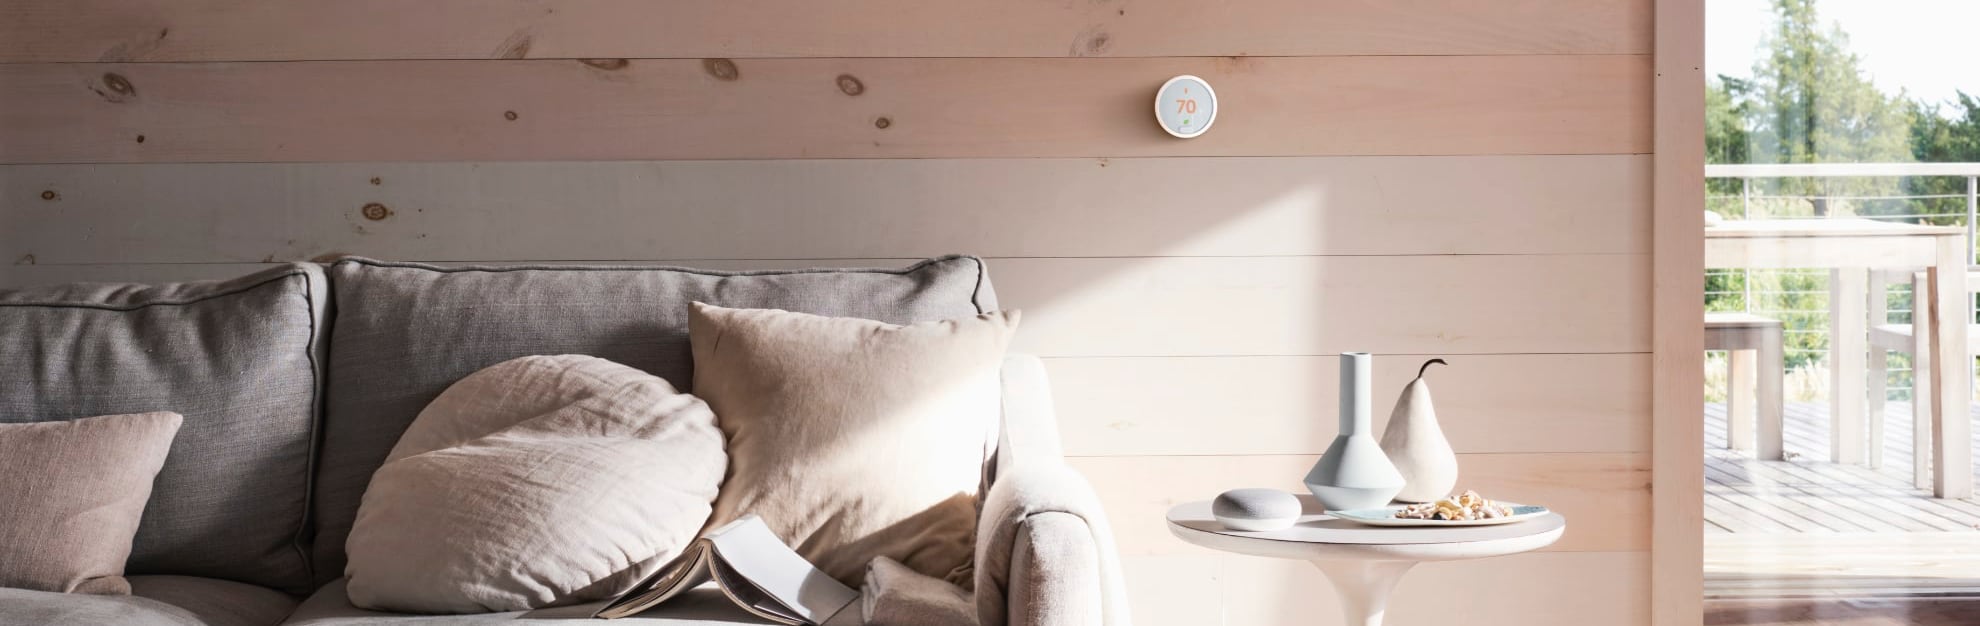 Vivint Home Automation in Reno